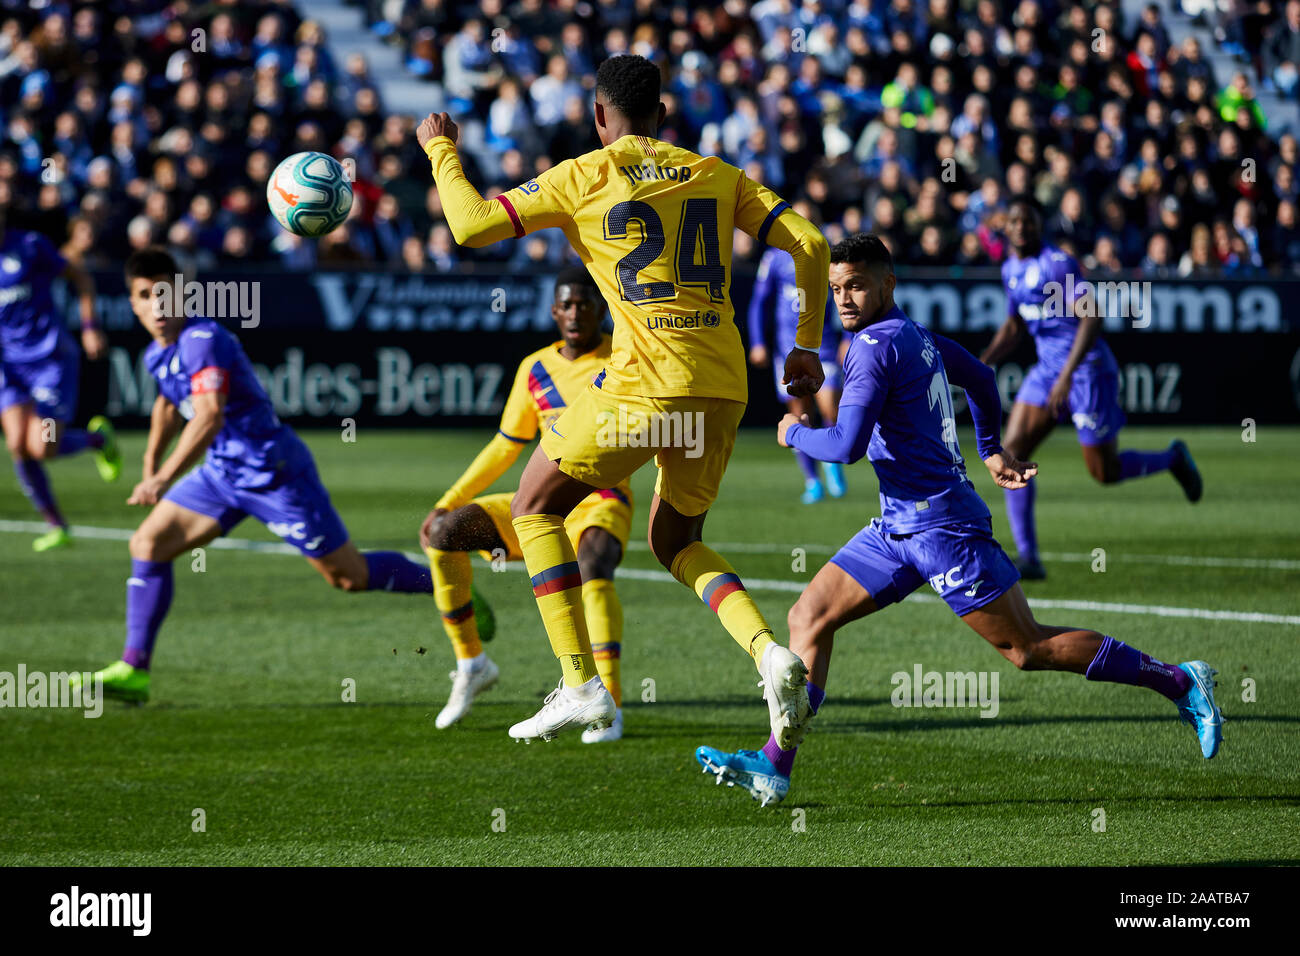 Leganes, Spain. 23rd Nov, 2019. Junior Firpo of FC Barcelona seen in action during the La Liga match between CD Leganes and FC Barcelona at Butarque Stadium in Leganes.(Final score; CD Leganes 1:2 FC Barcelona) Credit: SOPA Images Limited/Alamy Live News Stock Photo